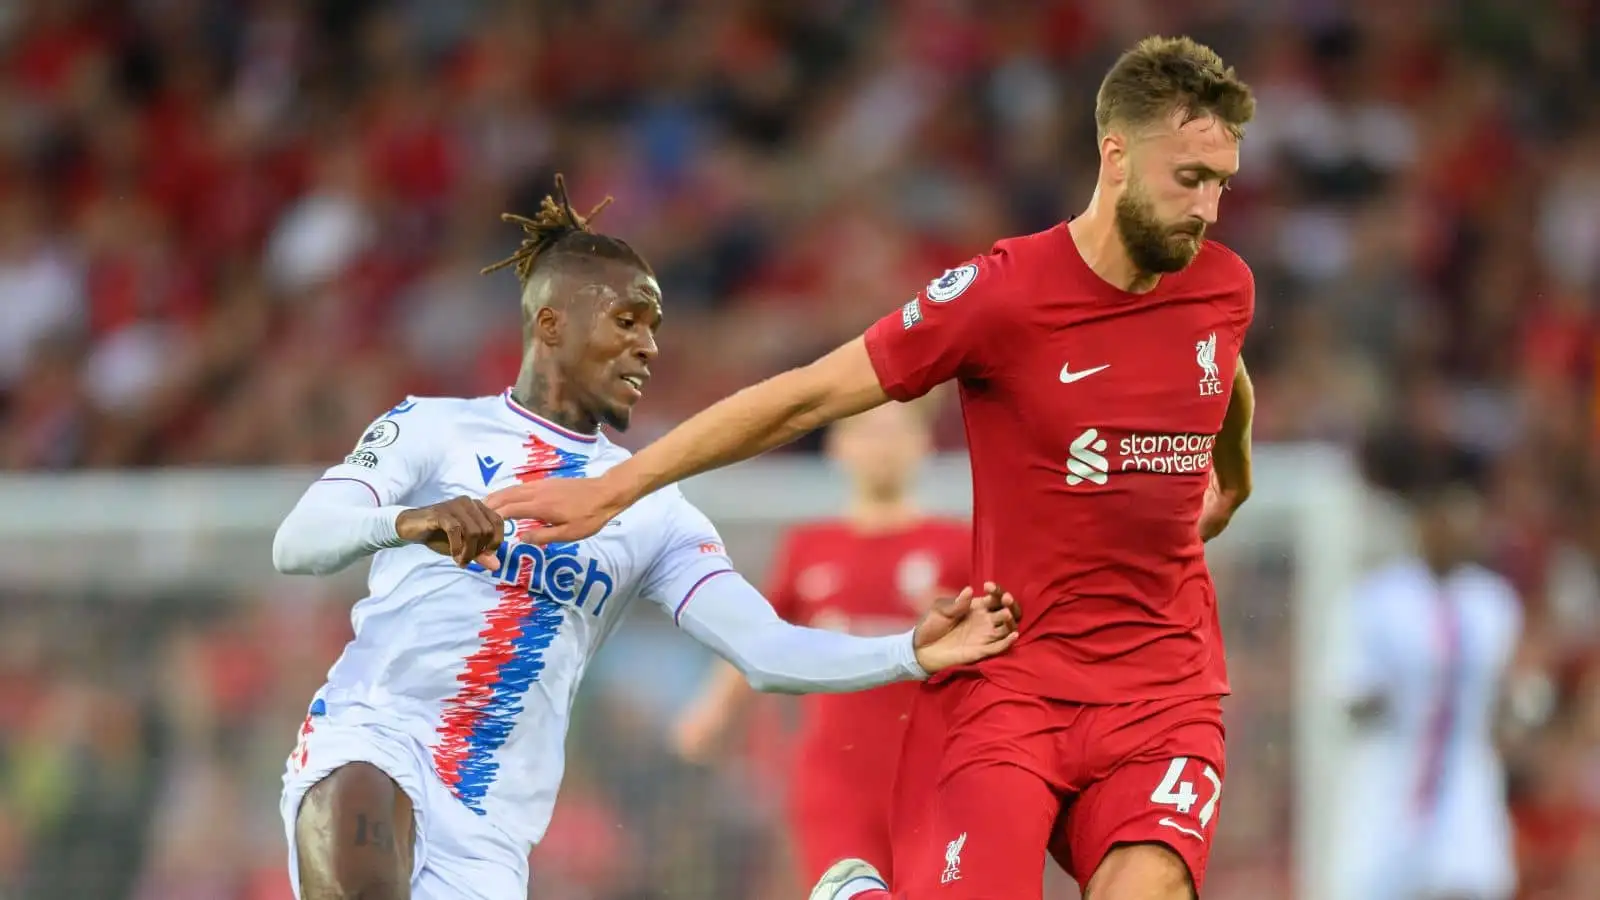 Nat Phillips of Liverpool holds off Wilfired Zaha during the Premier League match at Anfield